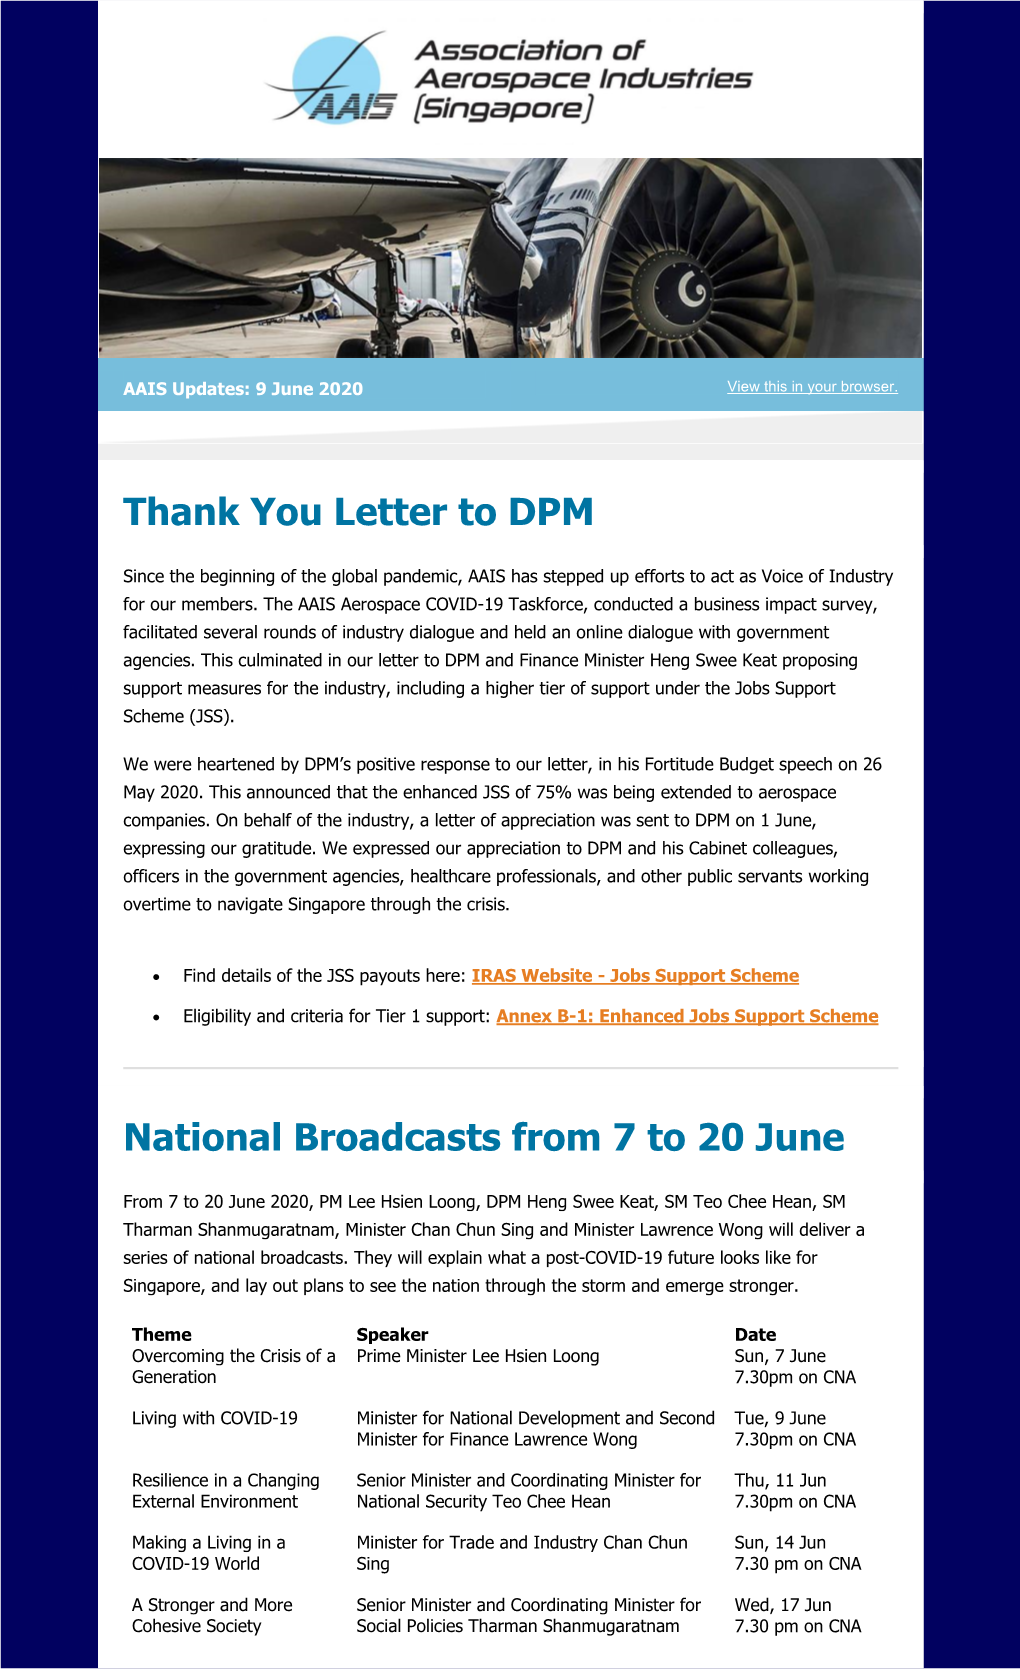 Thank You Letter to DPM National Broadcasts from 7 to 20 June